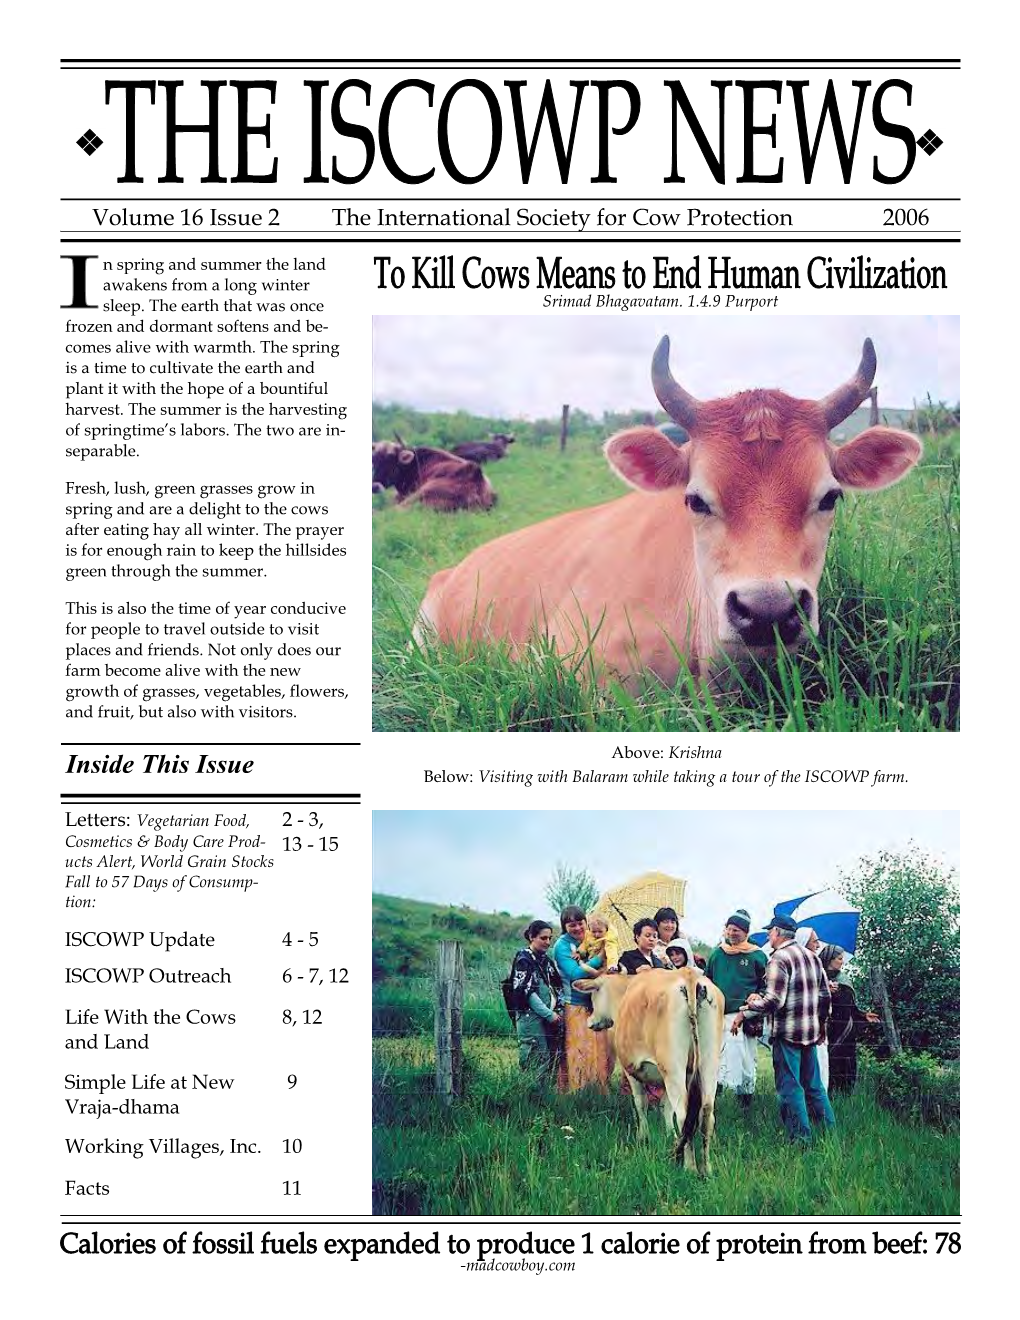 Inside This Issue Below: Visiting with Balaram While Taking a Tour of the ISCOWP Farm